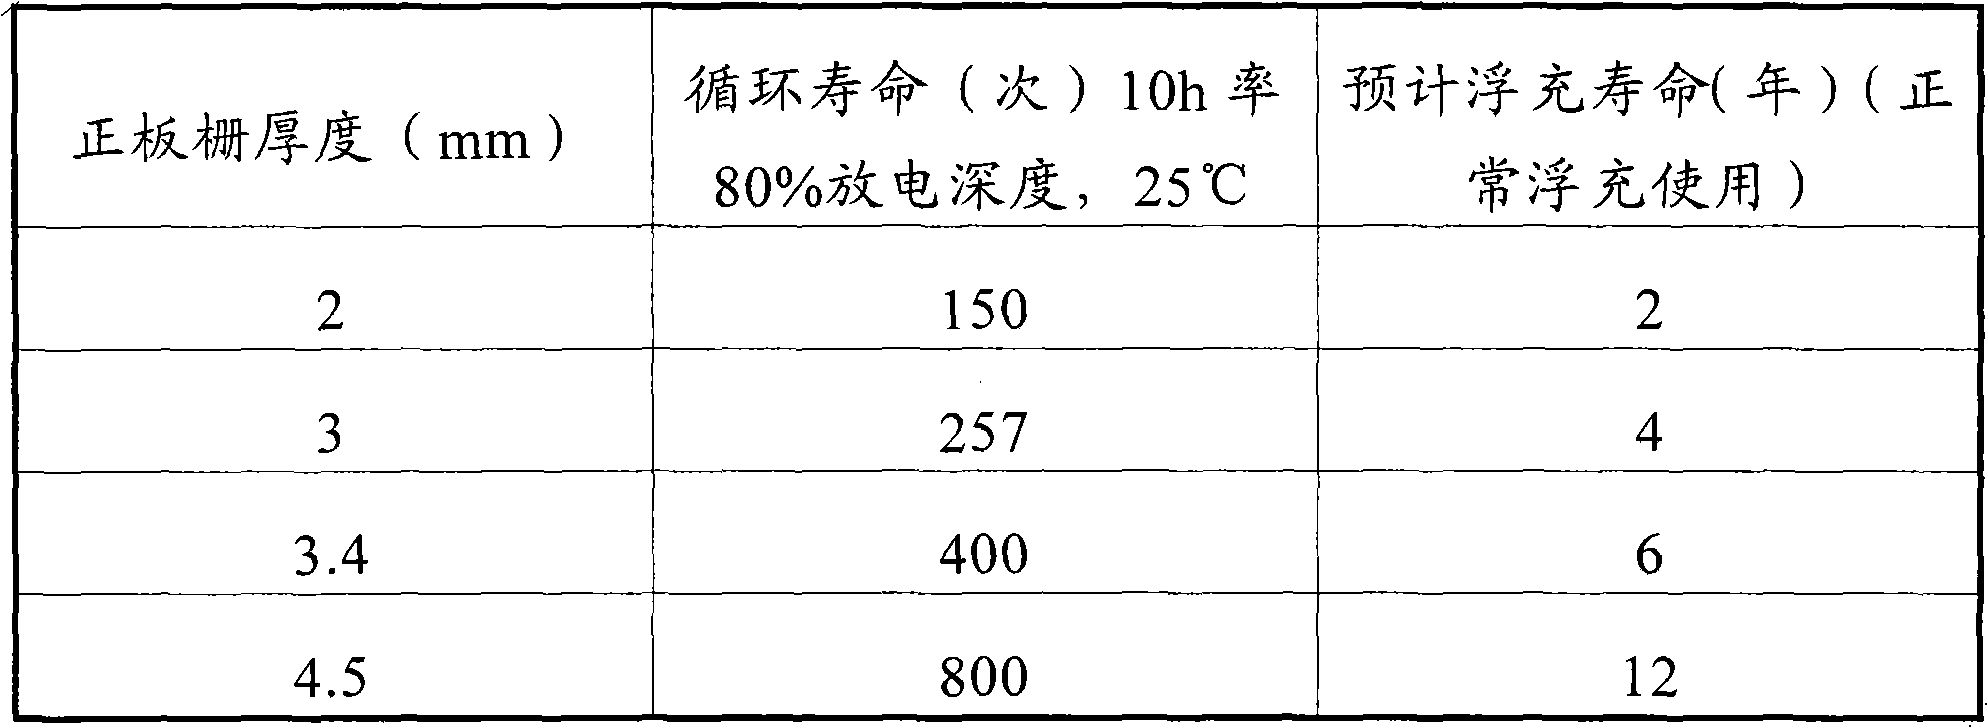 Method for analyzing and testing quality of storage battery